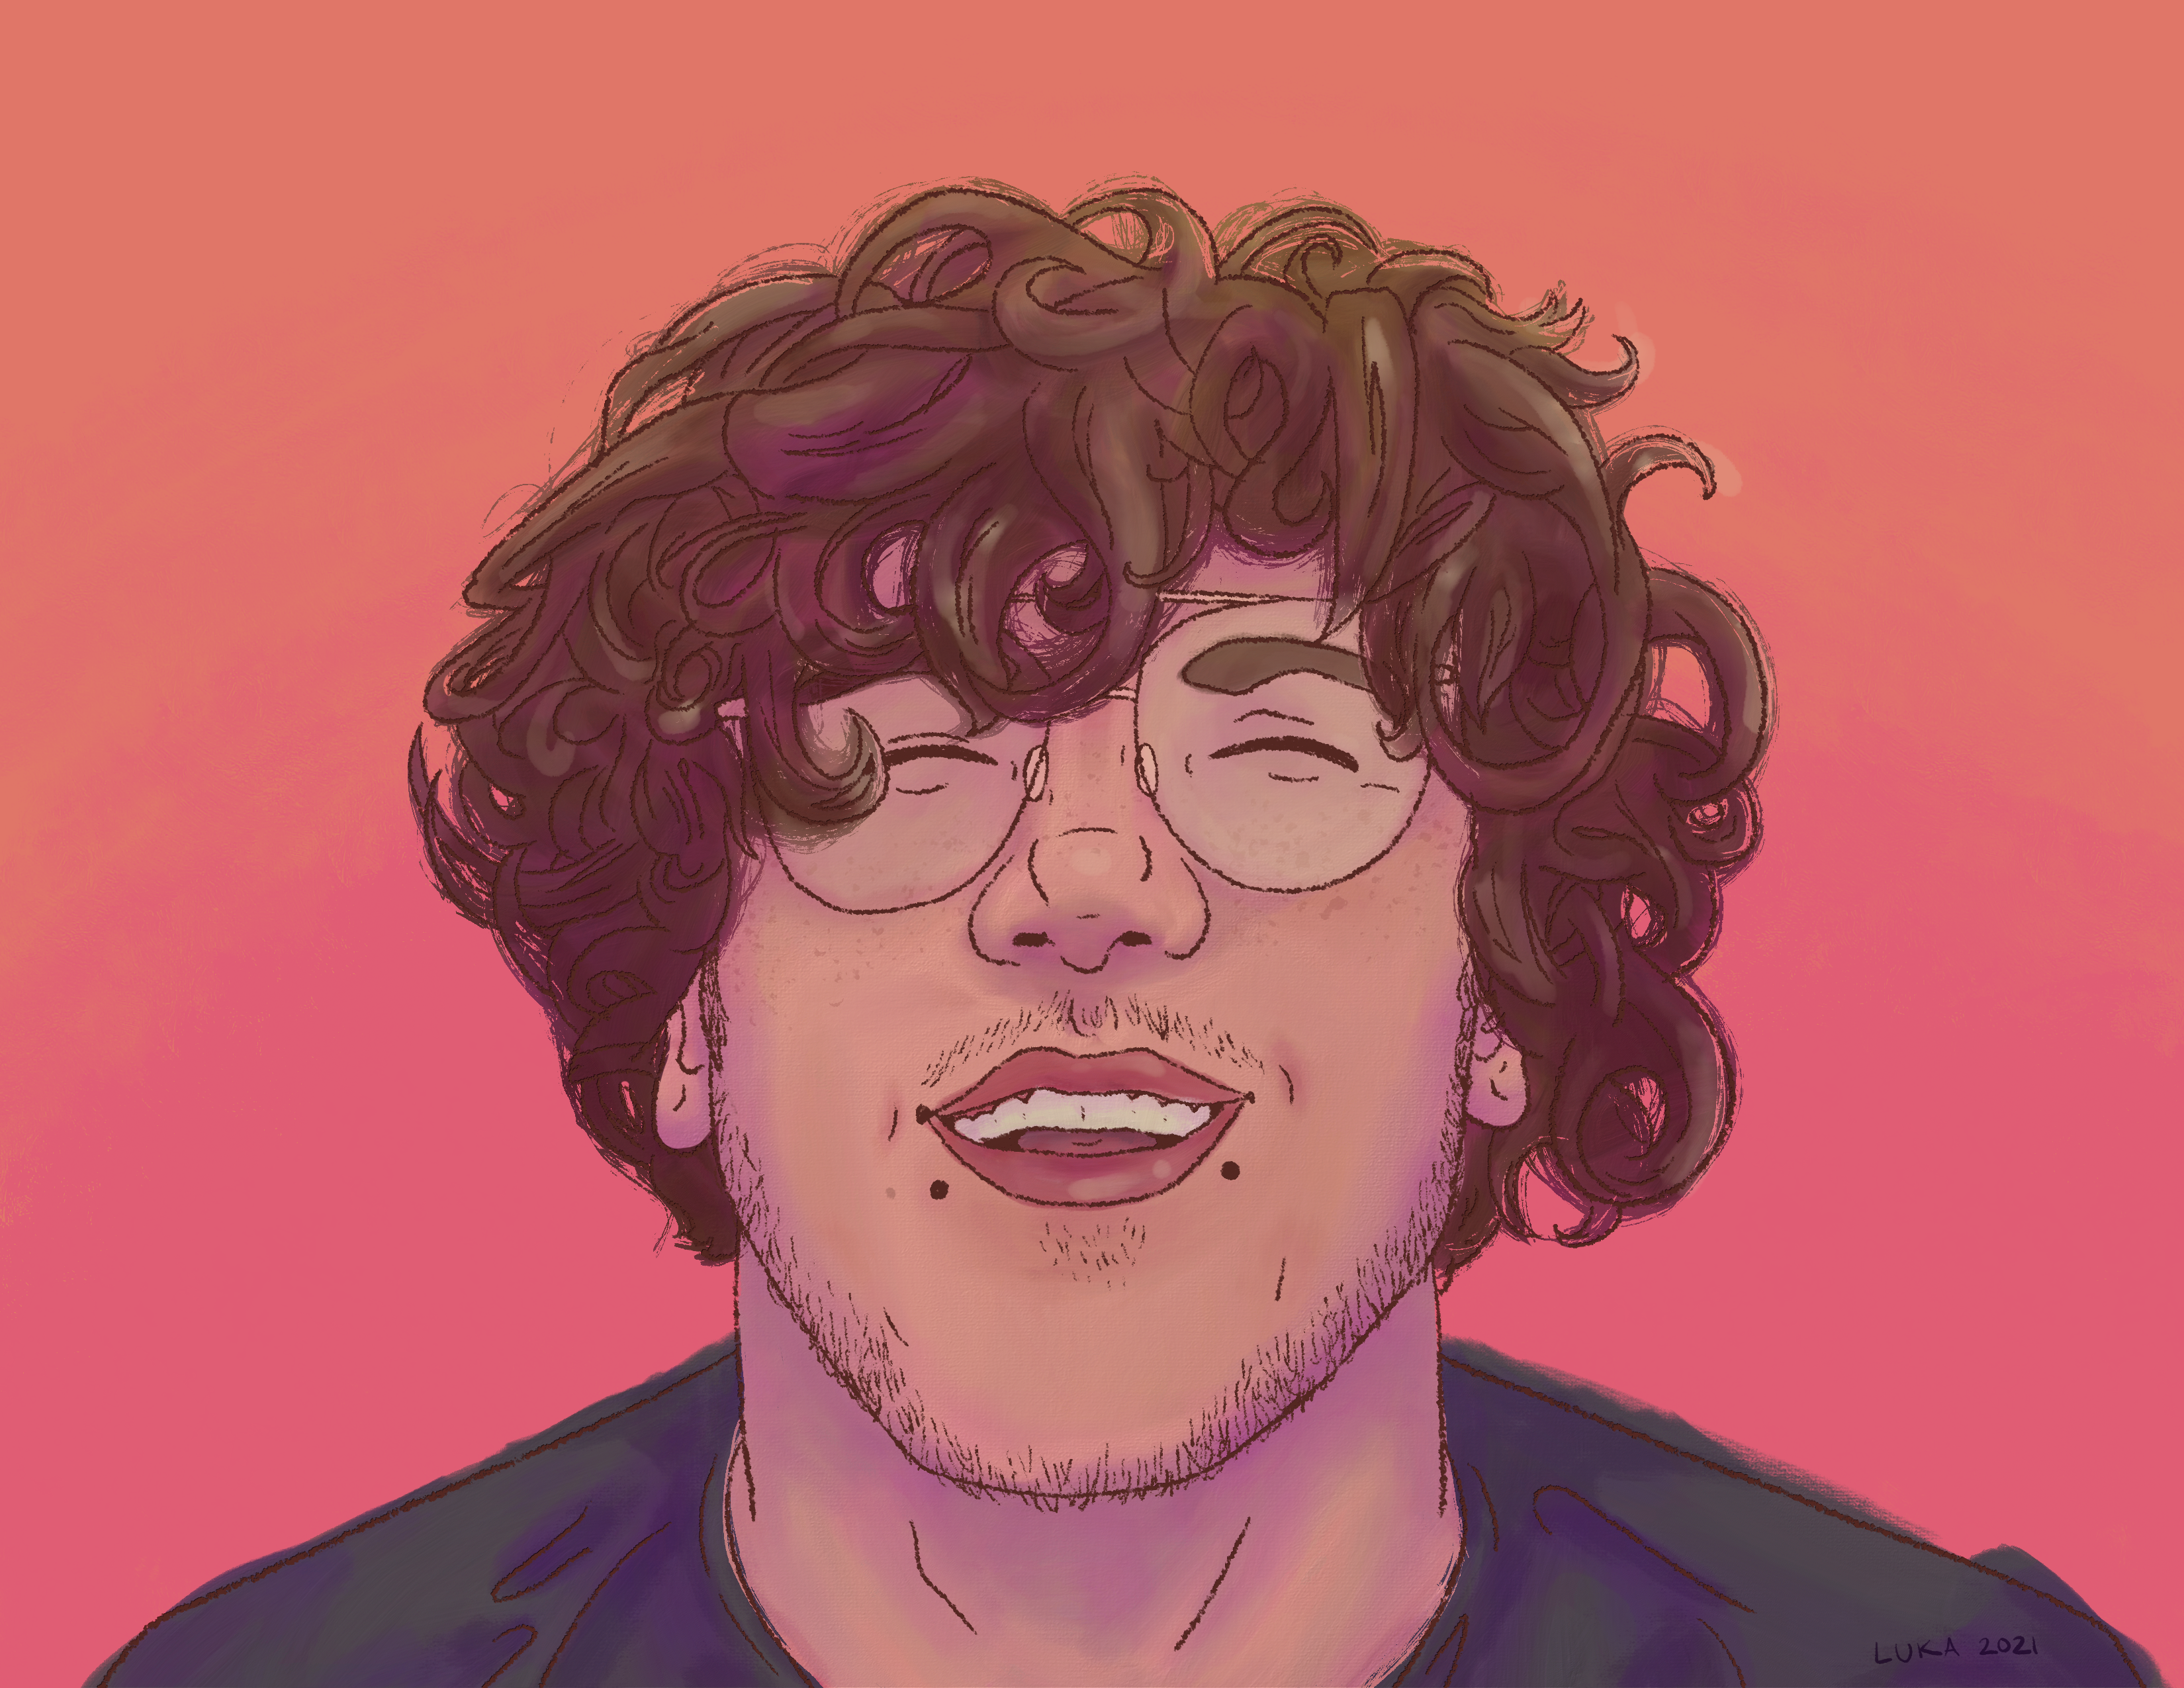 Illustration of a grinning young man with curly hair, glasses, freckles, lip piercings, and short stubble